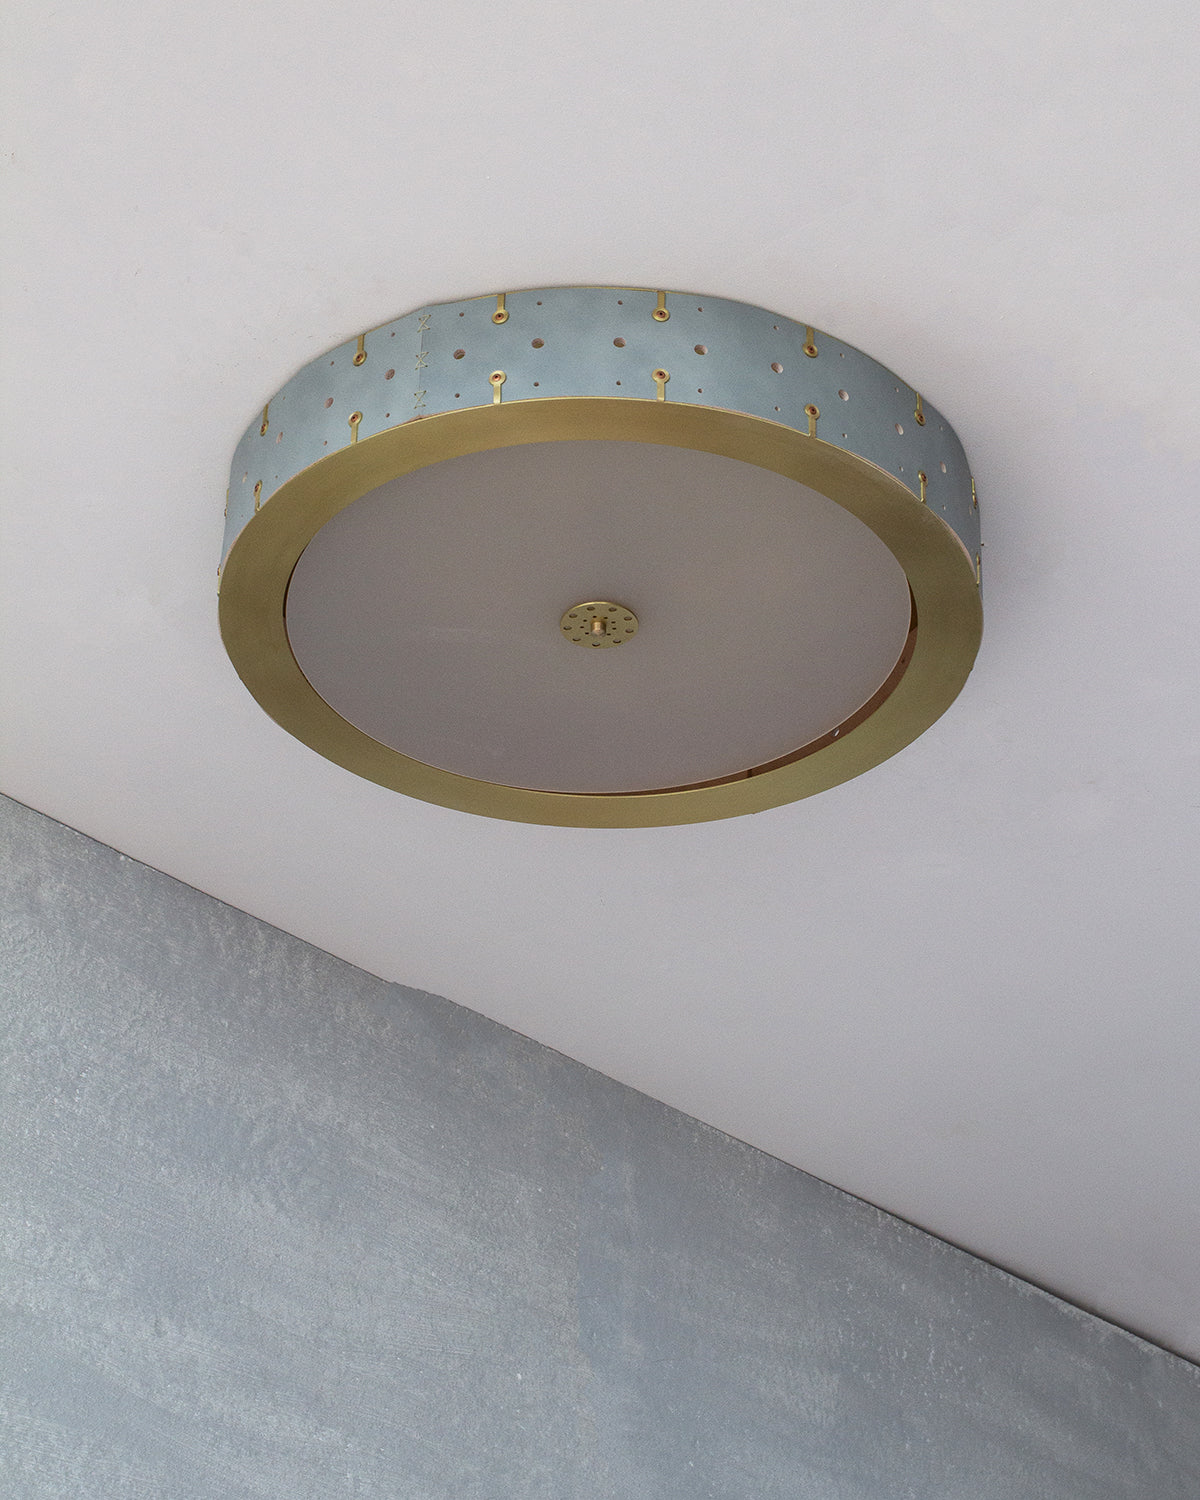 Beautiful satin brass flush mount ceiling fixture with handstitched leather drum shade